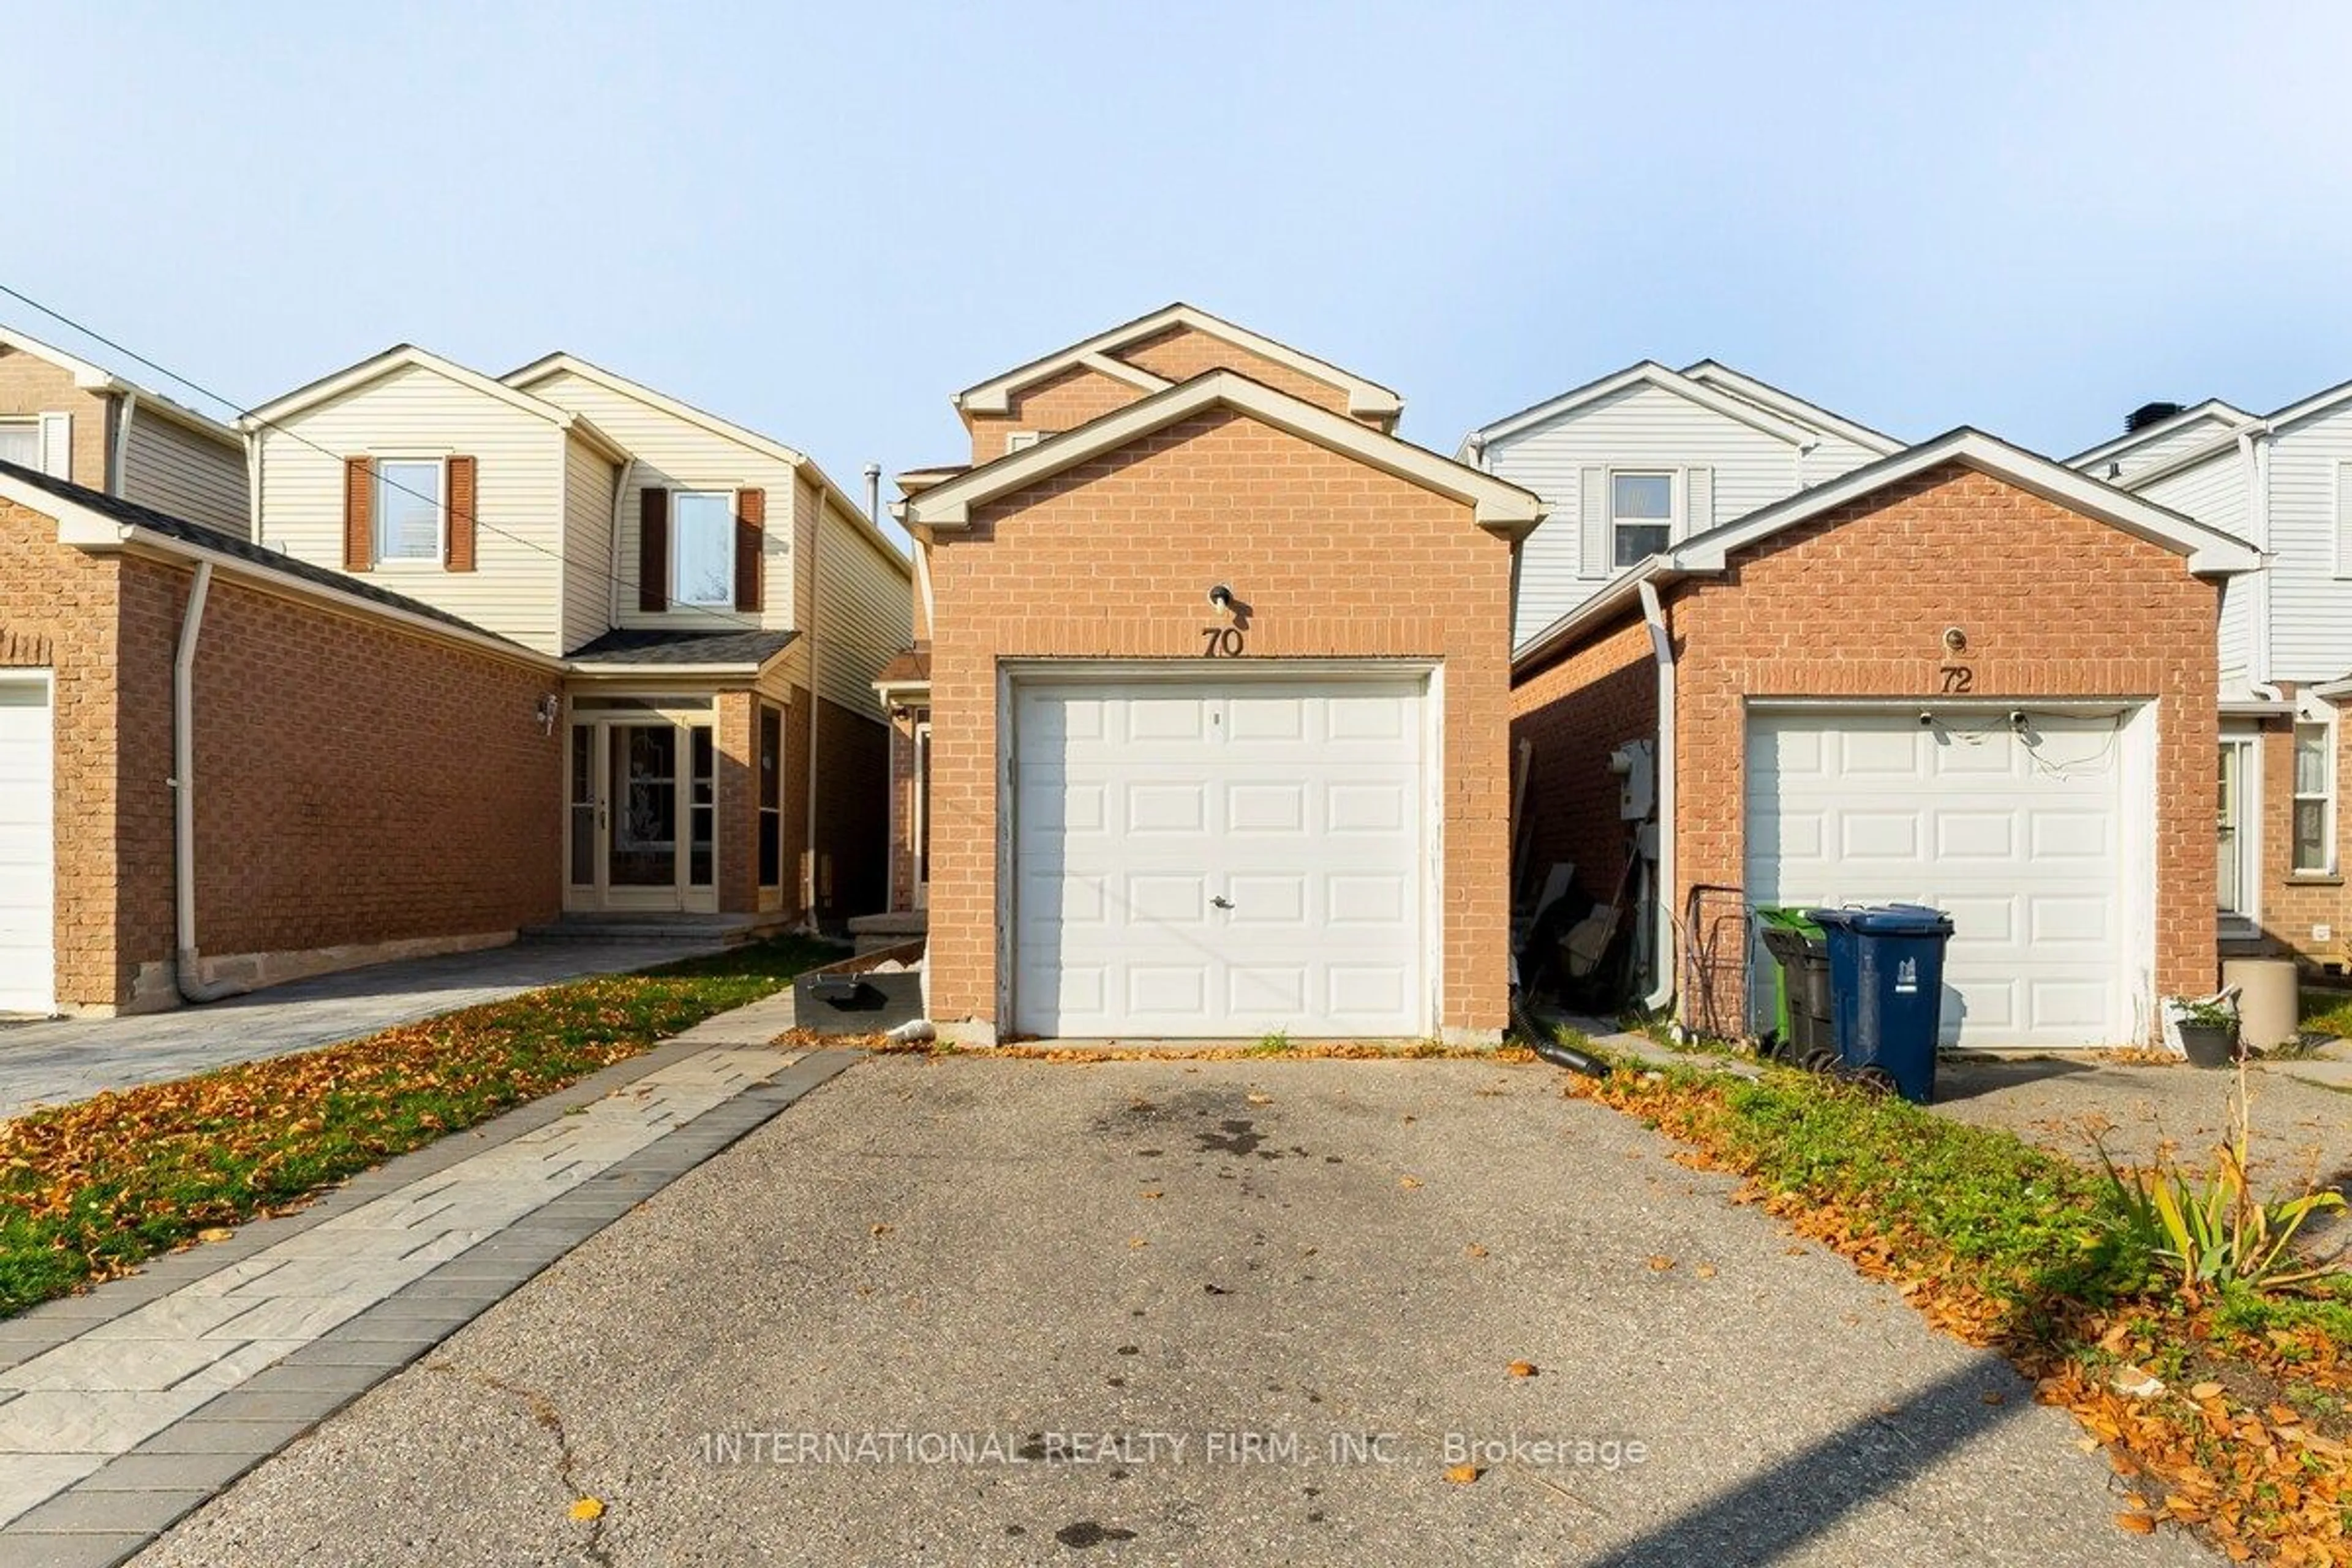 A pic from exterior of the house or condo for 70 Penmarric Pl, Toronto Ontario M1V 4E5